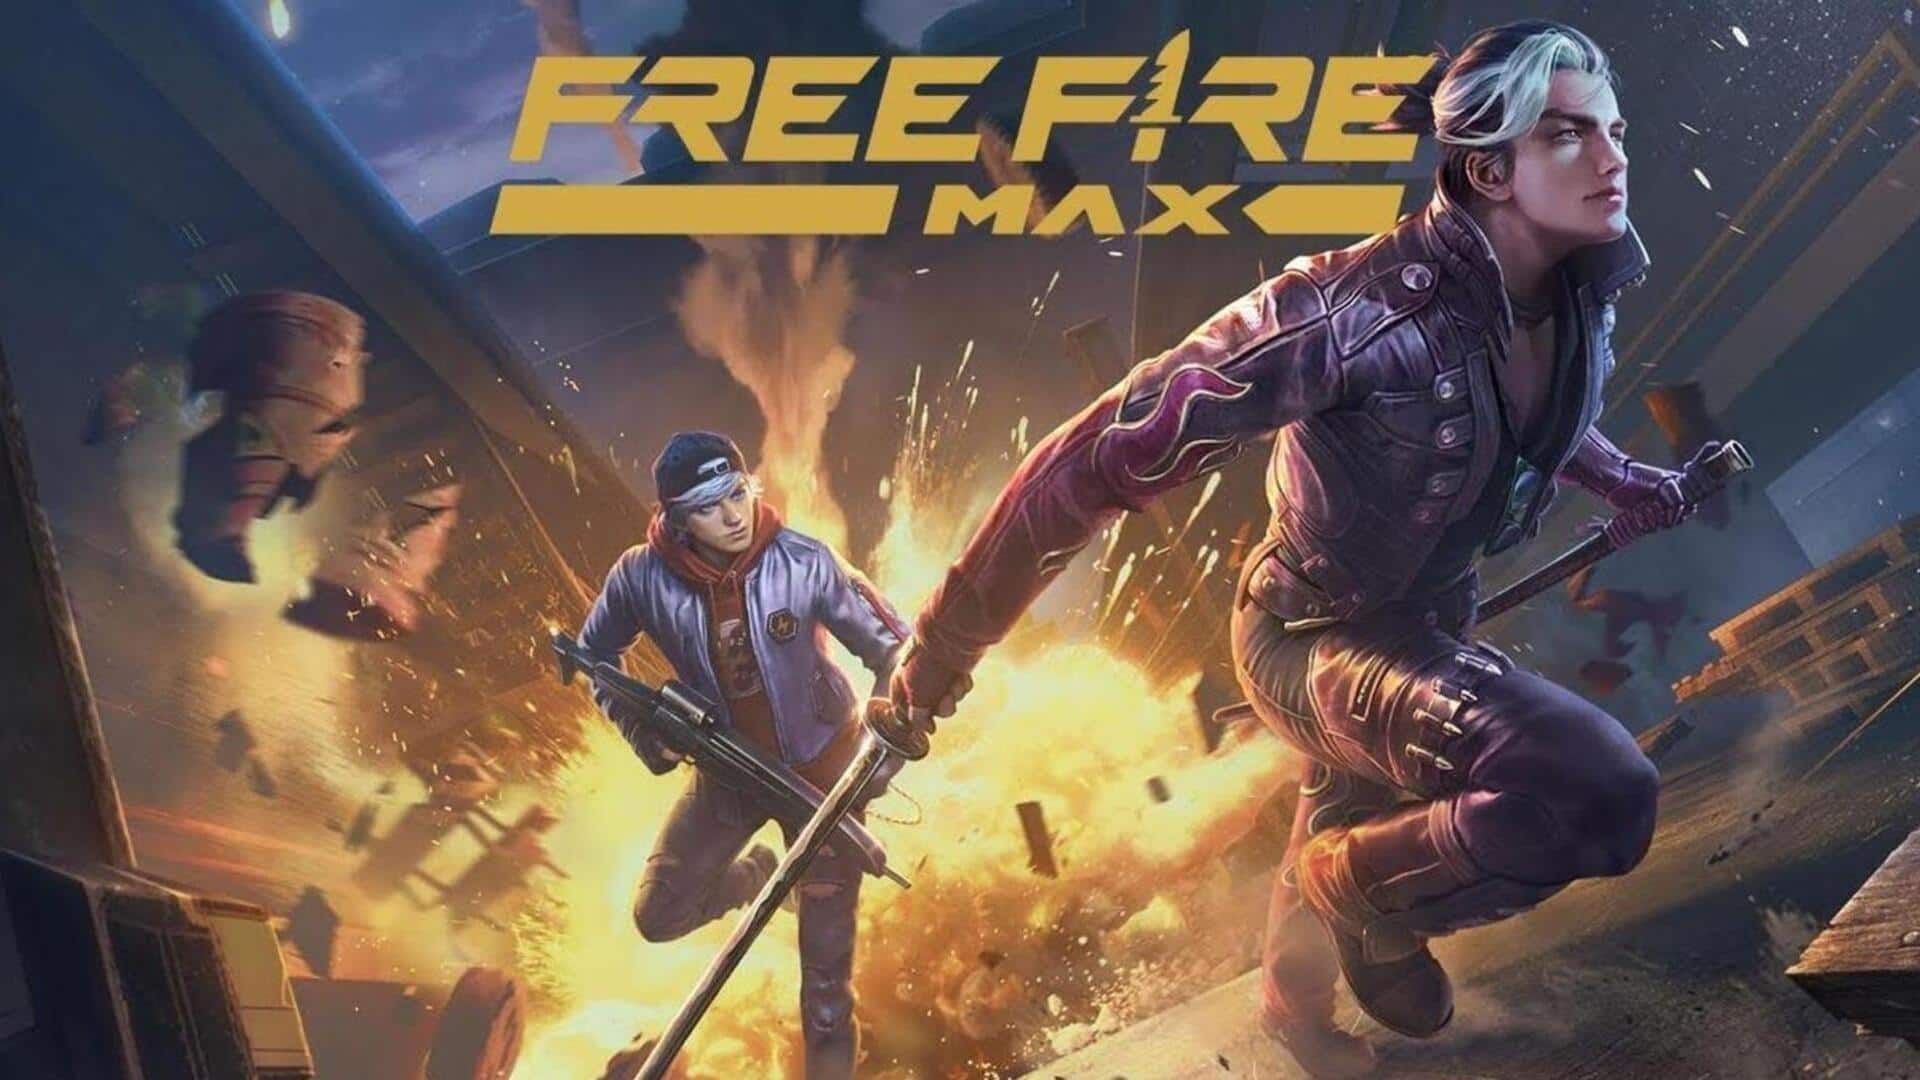 Garena Free Fire MAX's codes for December 9: Redeem now